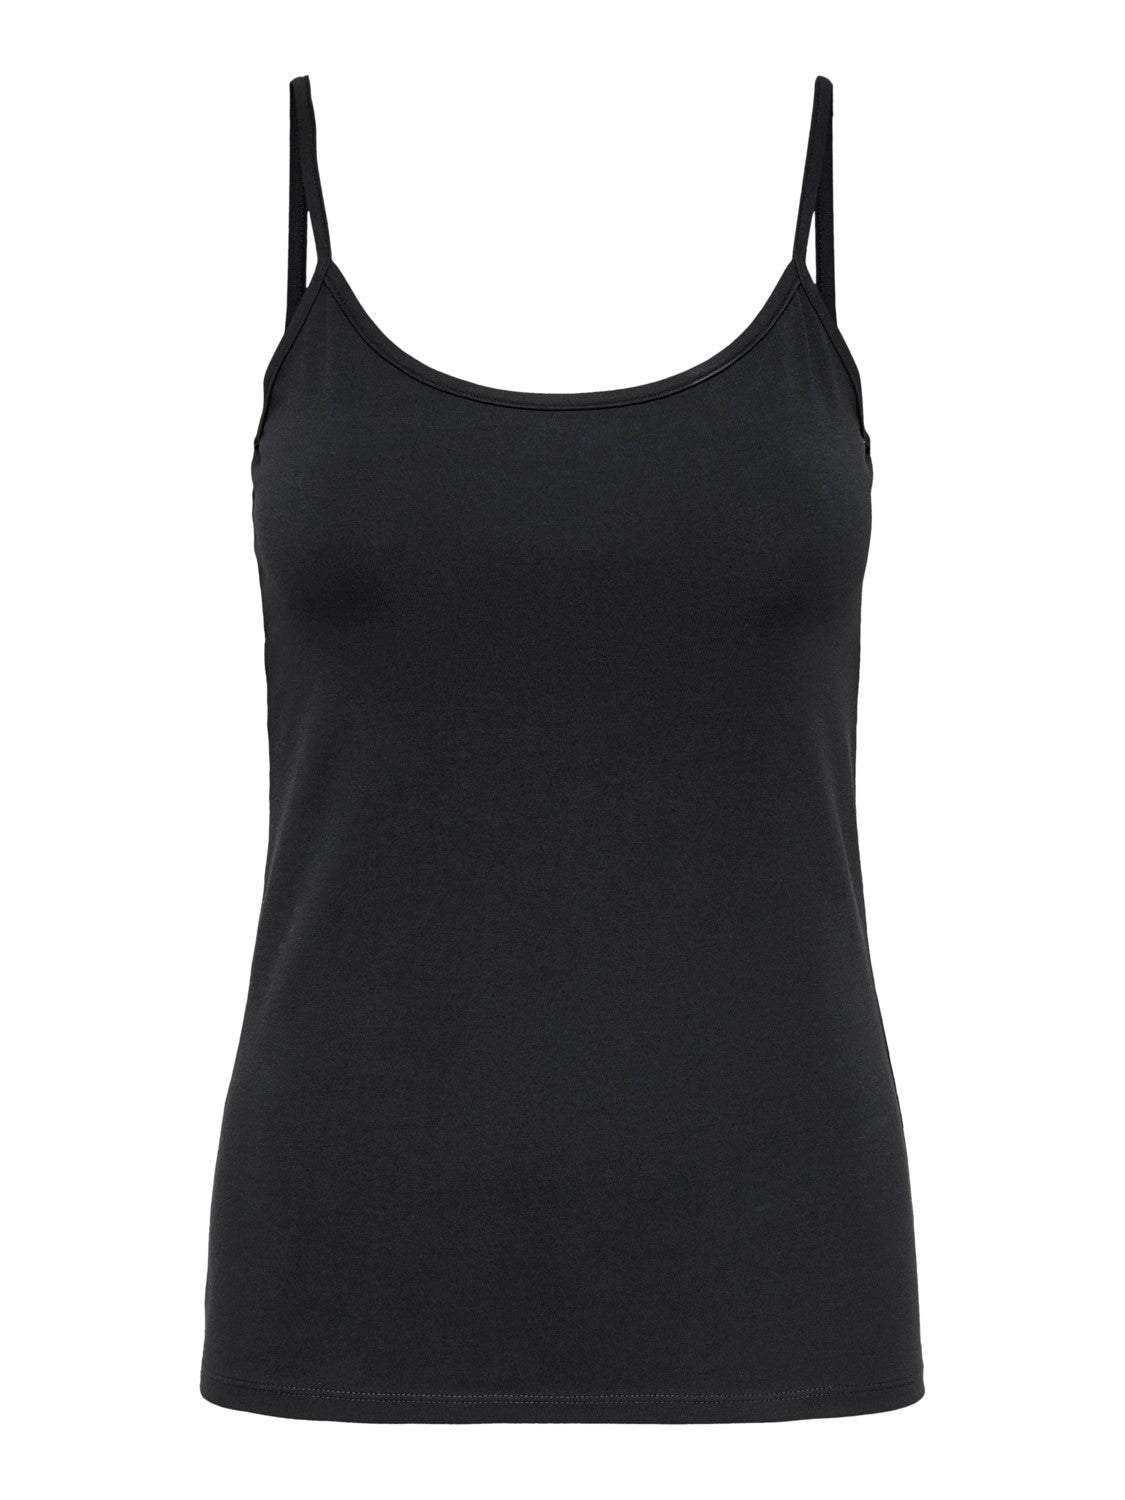 Seed Heritage Top Womens 8 Black Silk Sleeveless Relaxed Fit Camisole Tank